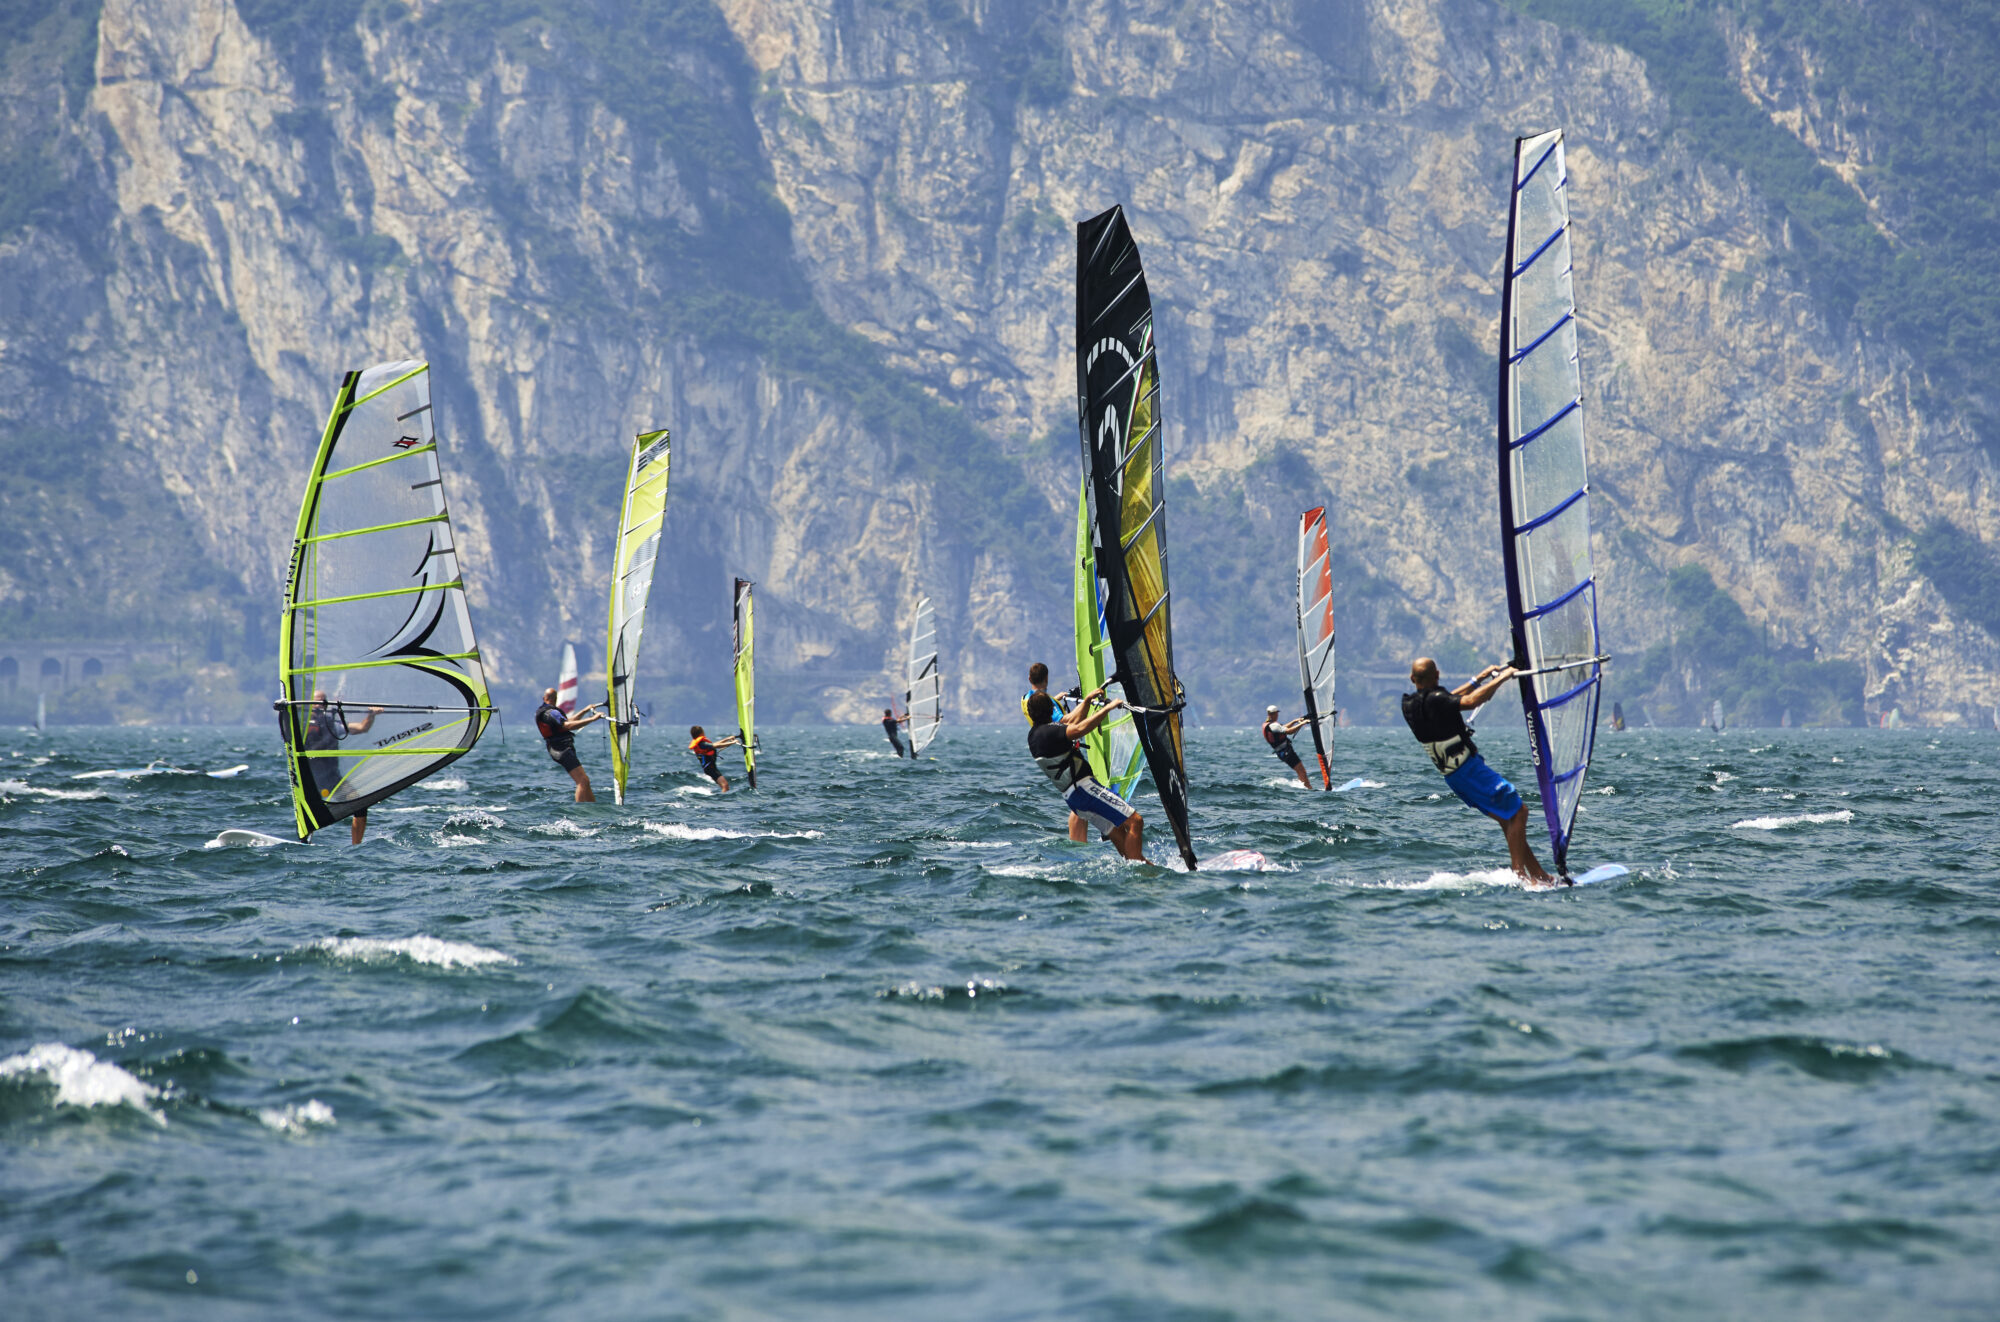 Capture the adrenaline of exciting water sports on the shores of Lake Garda